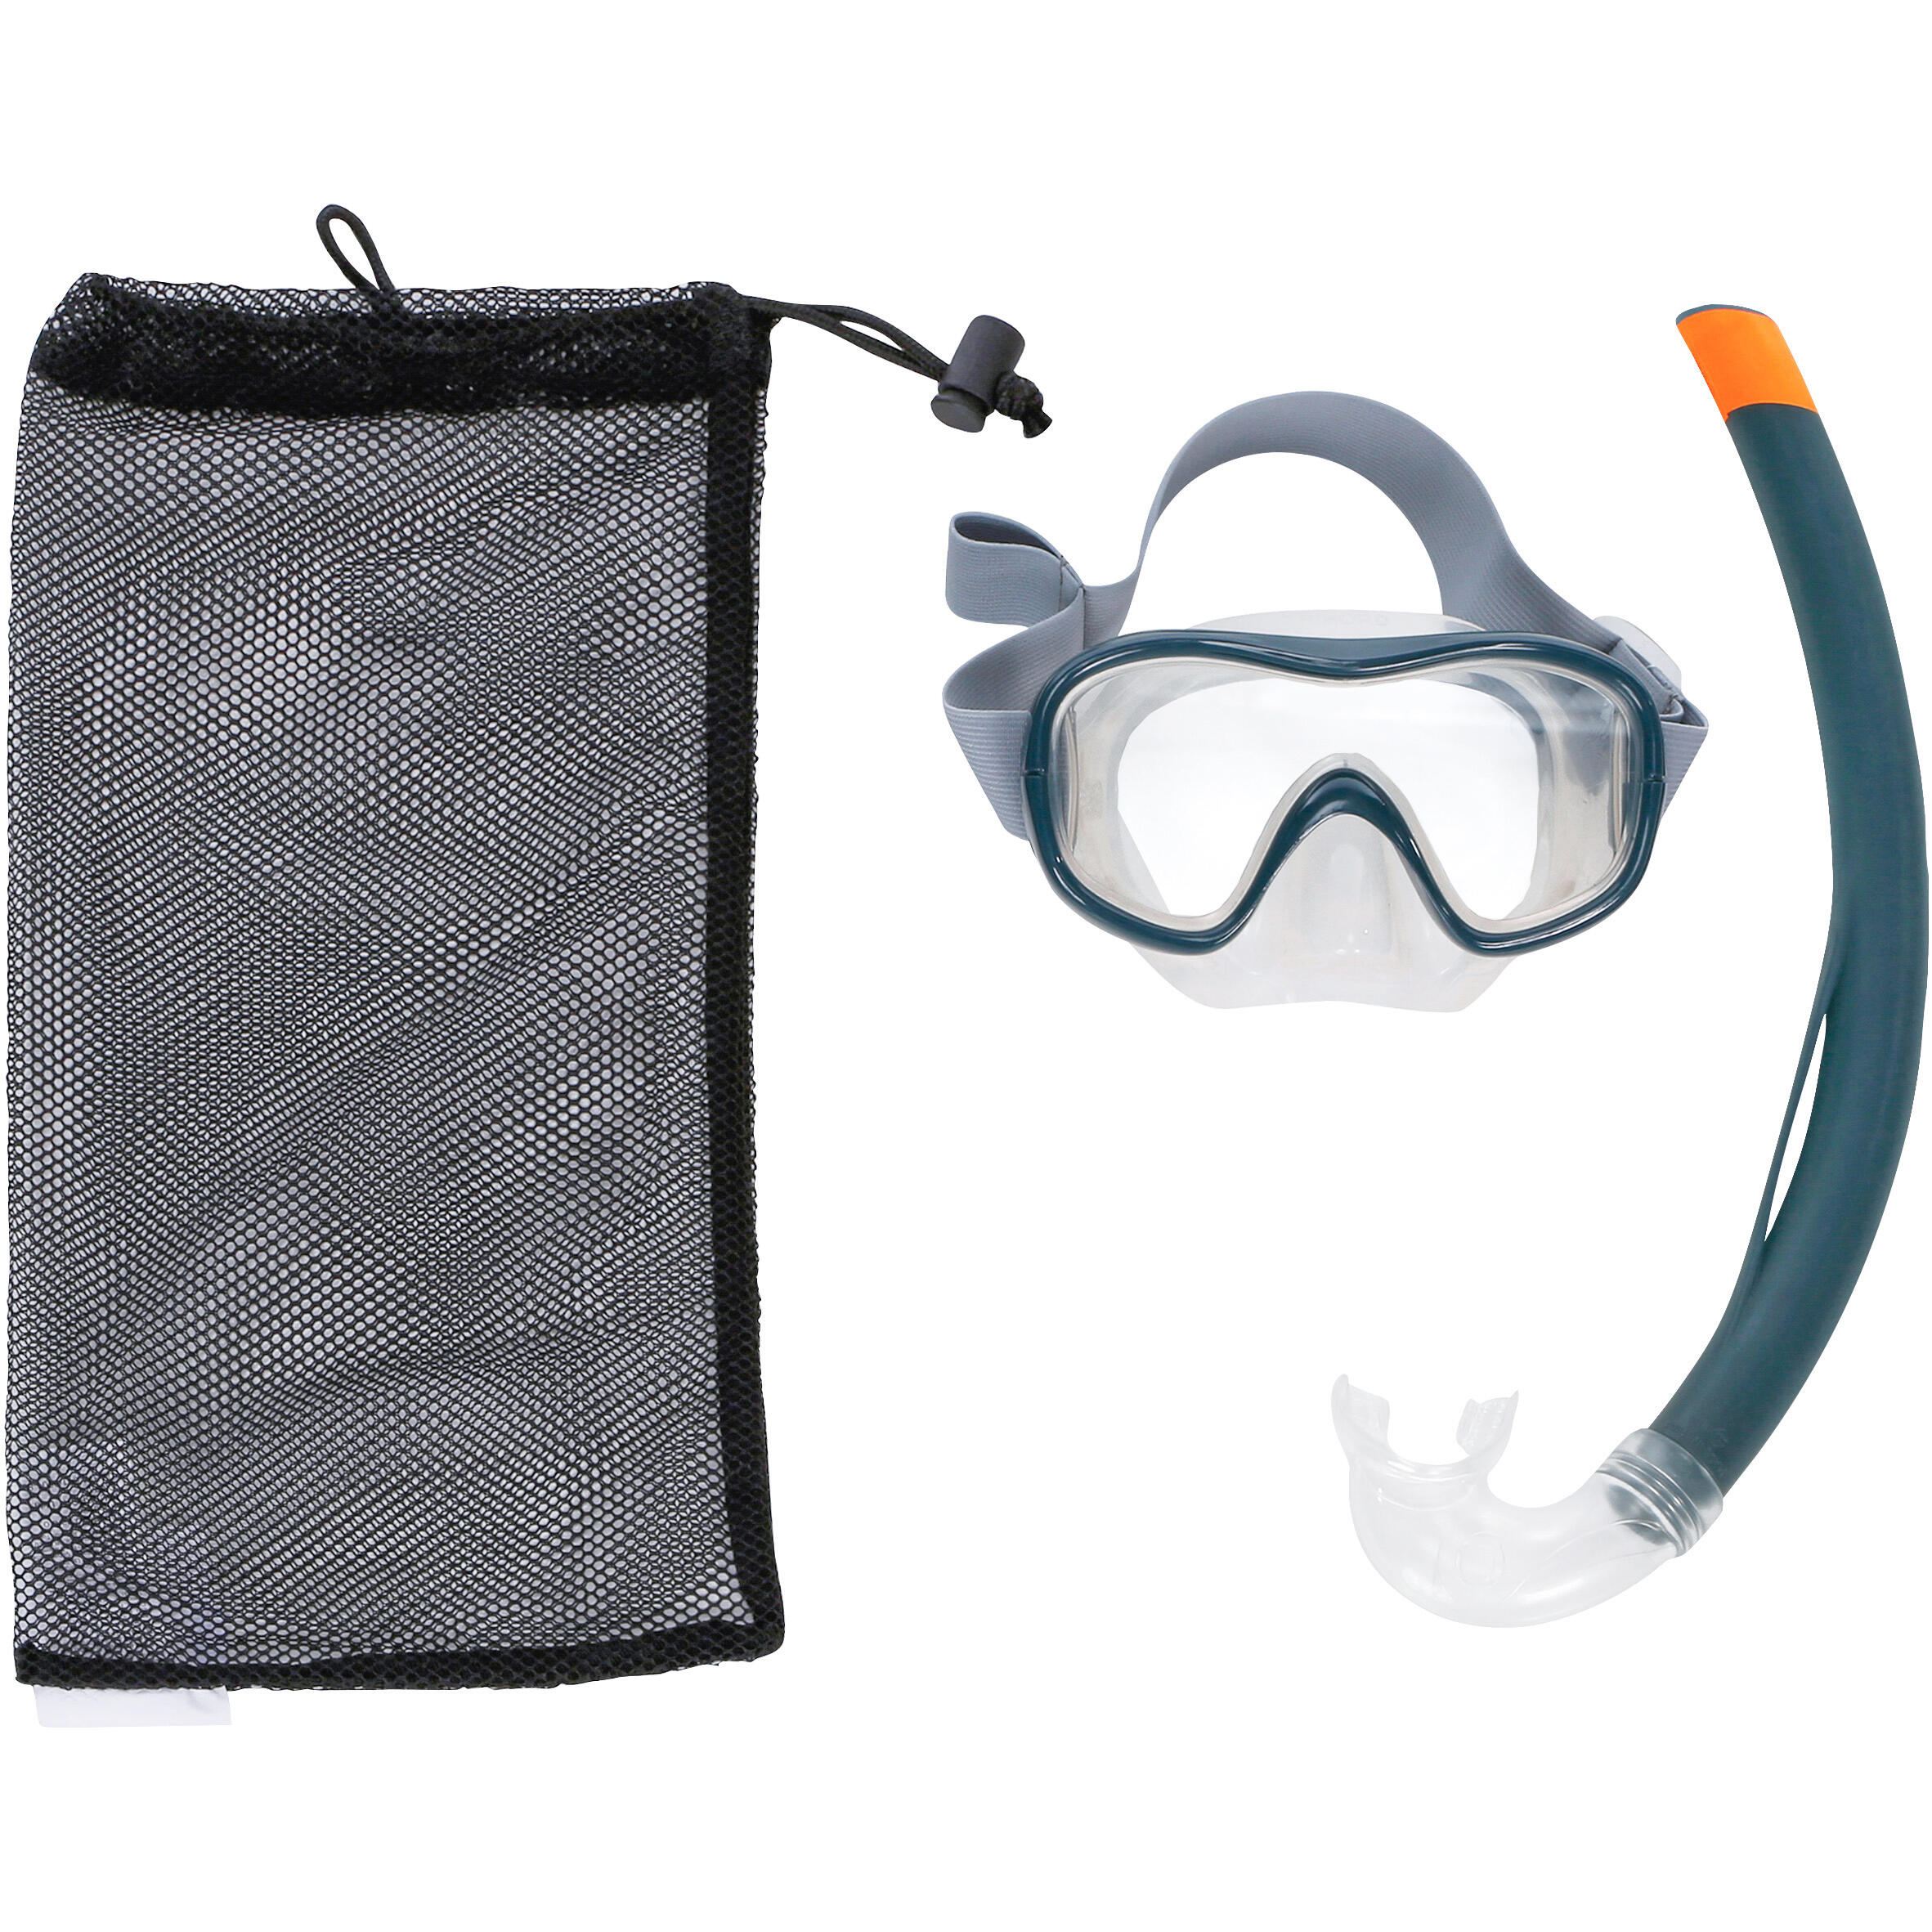 SUBEA Adult and kids' diving snorkelling Mask and Snorkel kit SNK 500 - grey